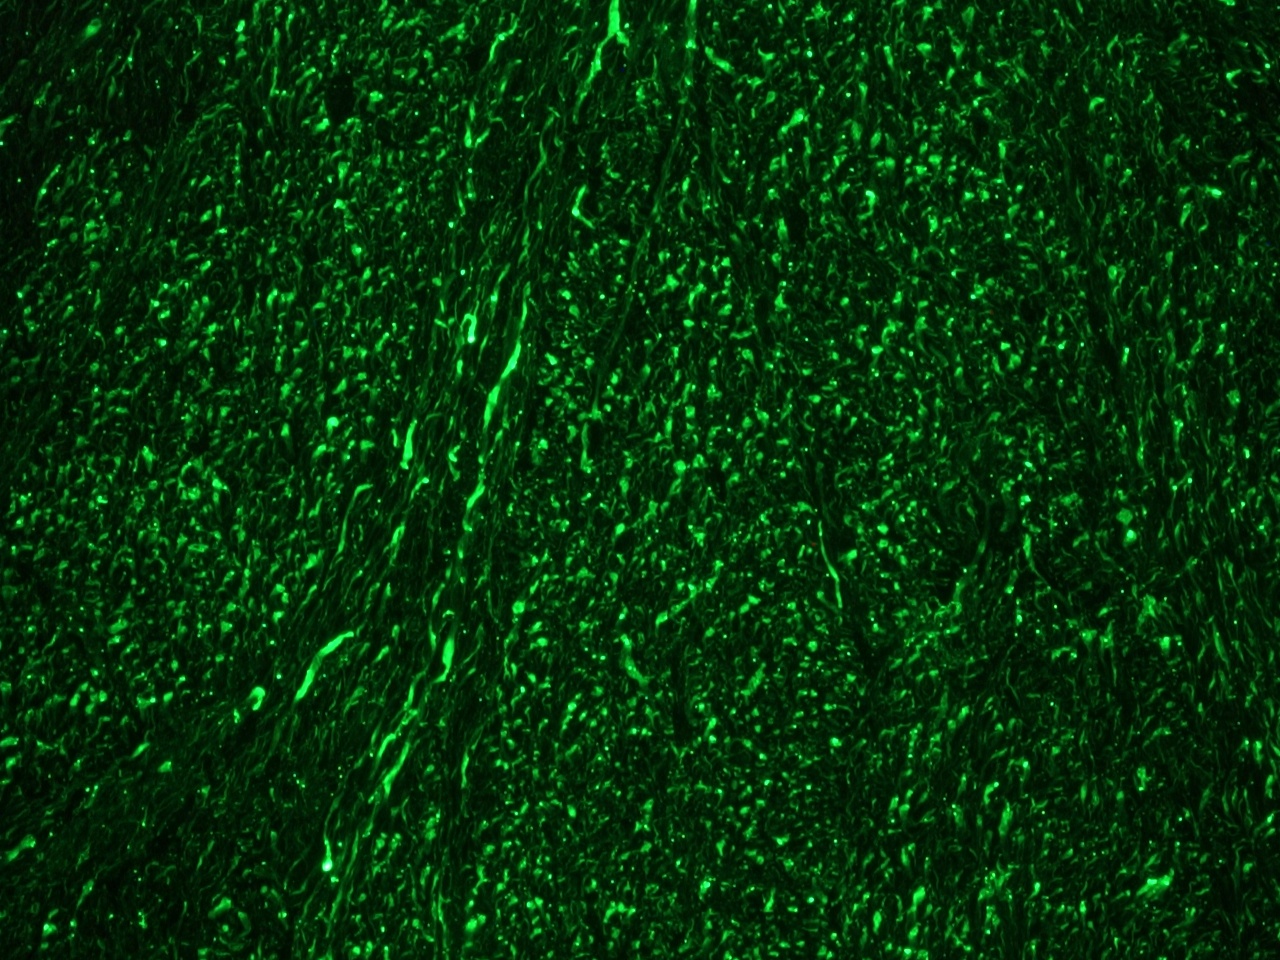 Figure 1. Indirect immunostaining of nerve fibers in a frozen section of rat brain using MUB1305P (clone RNF406) at a 1:100 dilution.